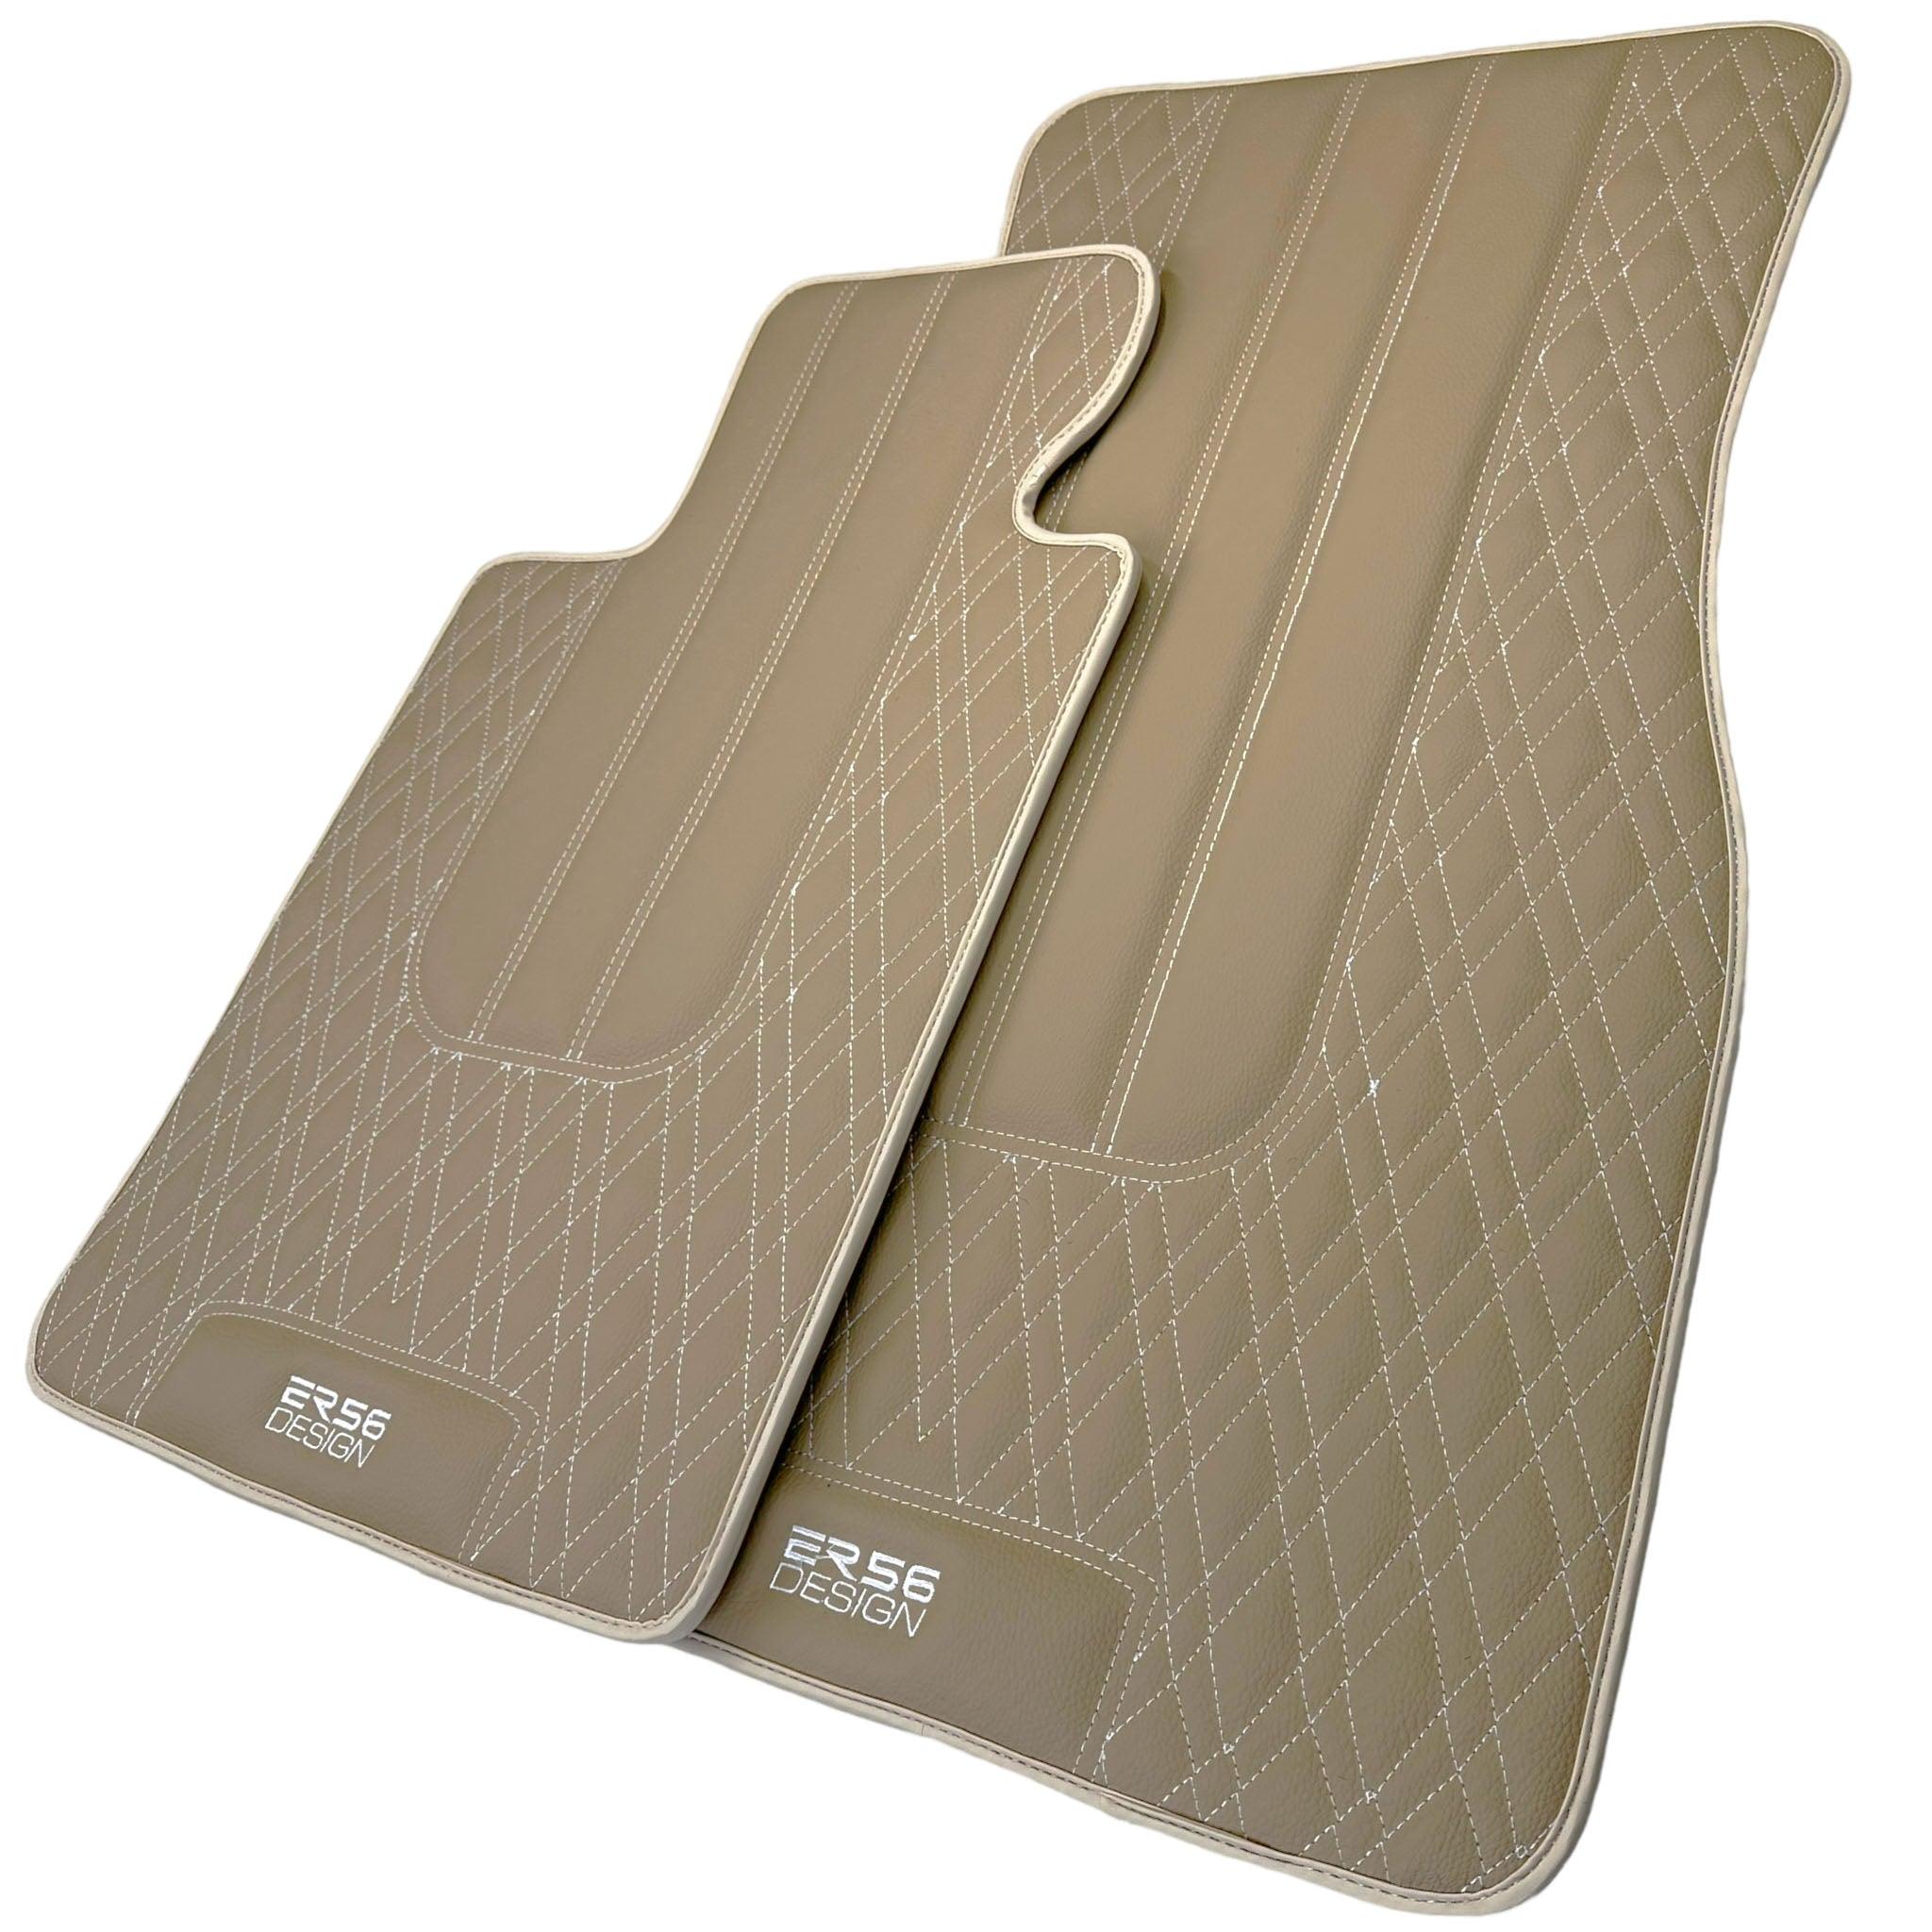 Beige Leather Floor Mats For BMW X6M Series F86